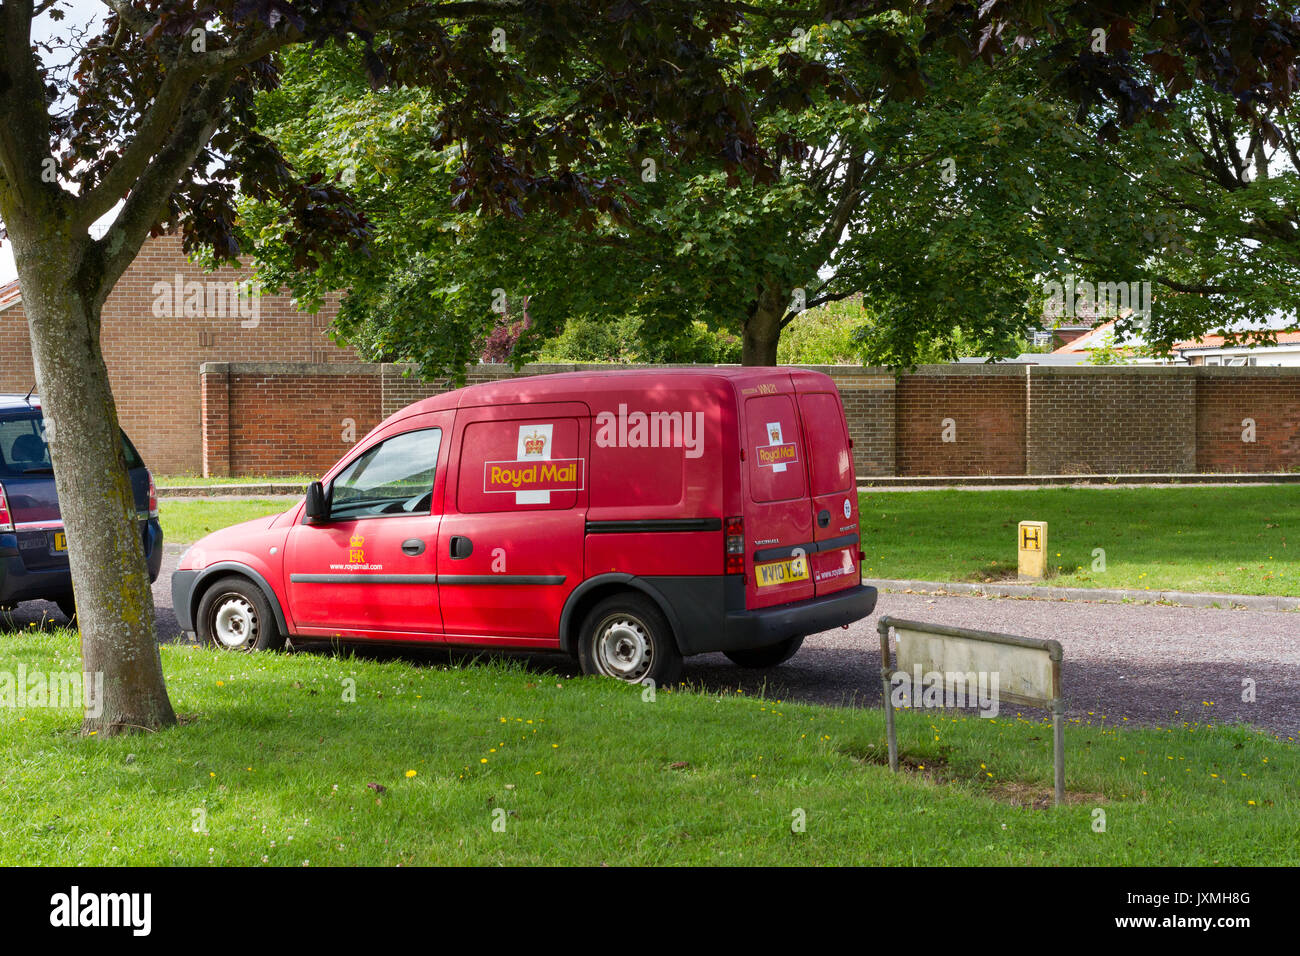 Royal Mail postal delivery van parked in a residential area Stock Photo